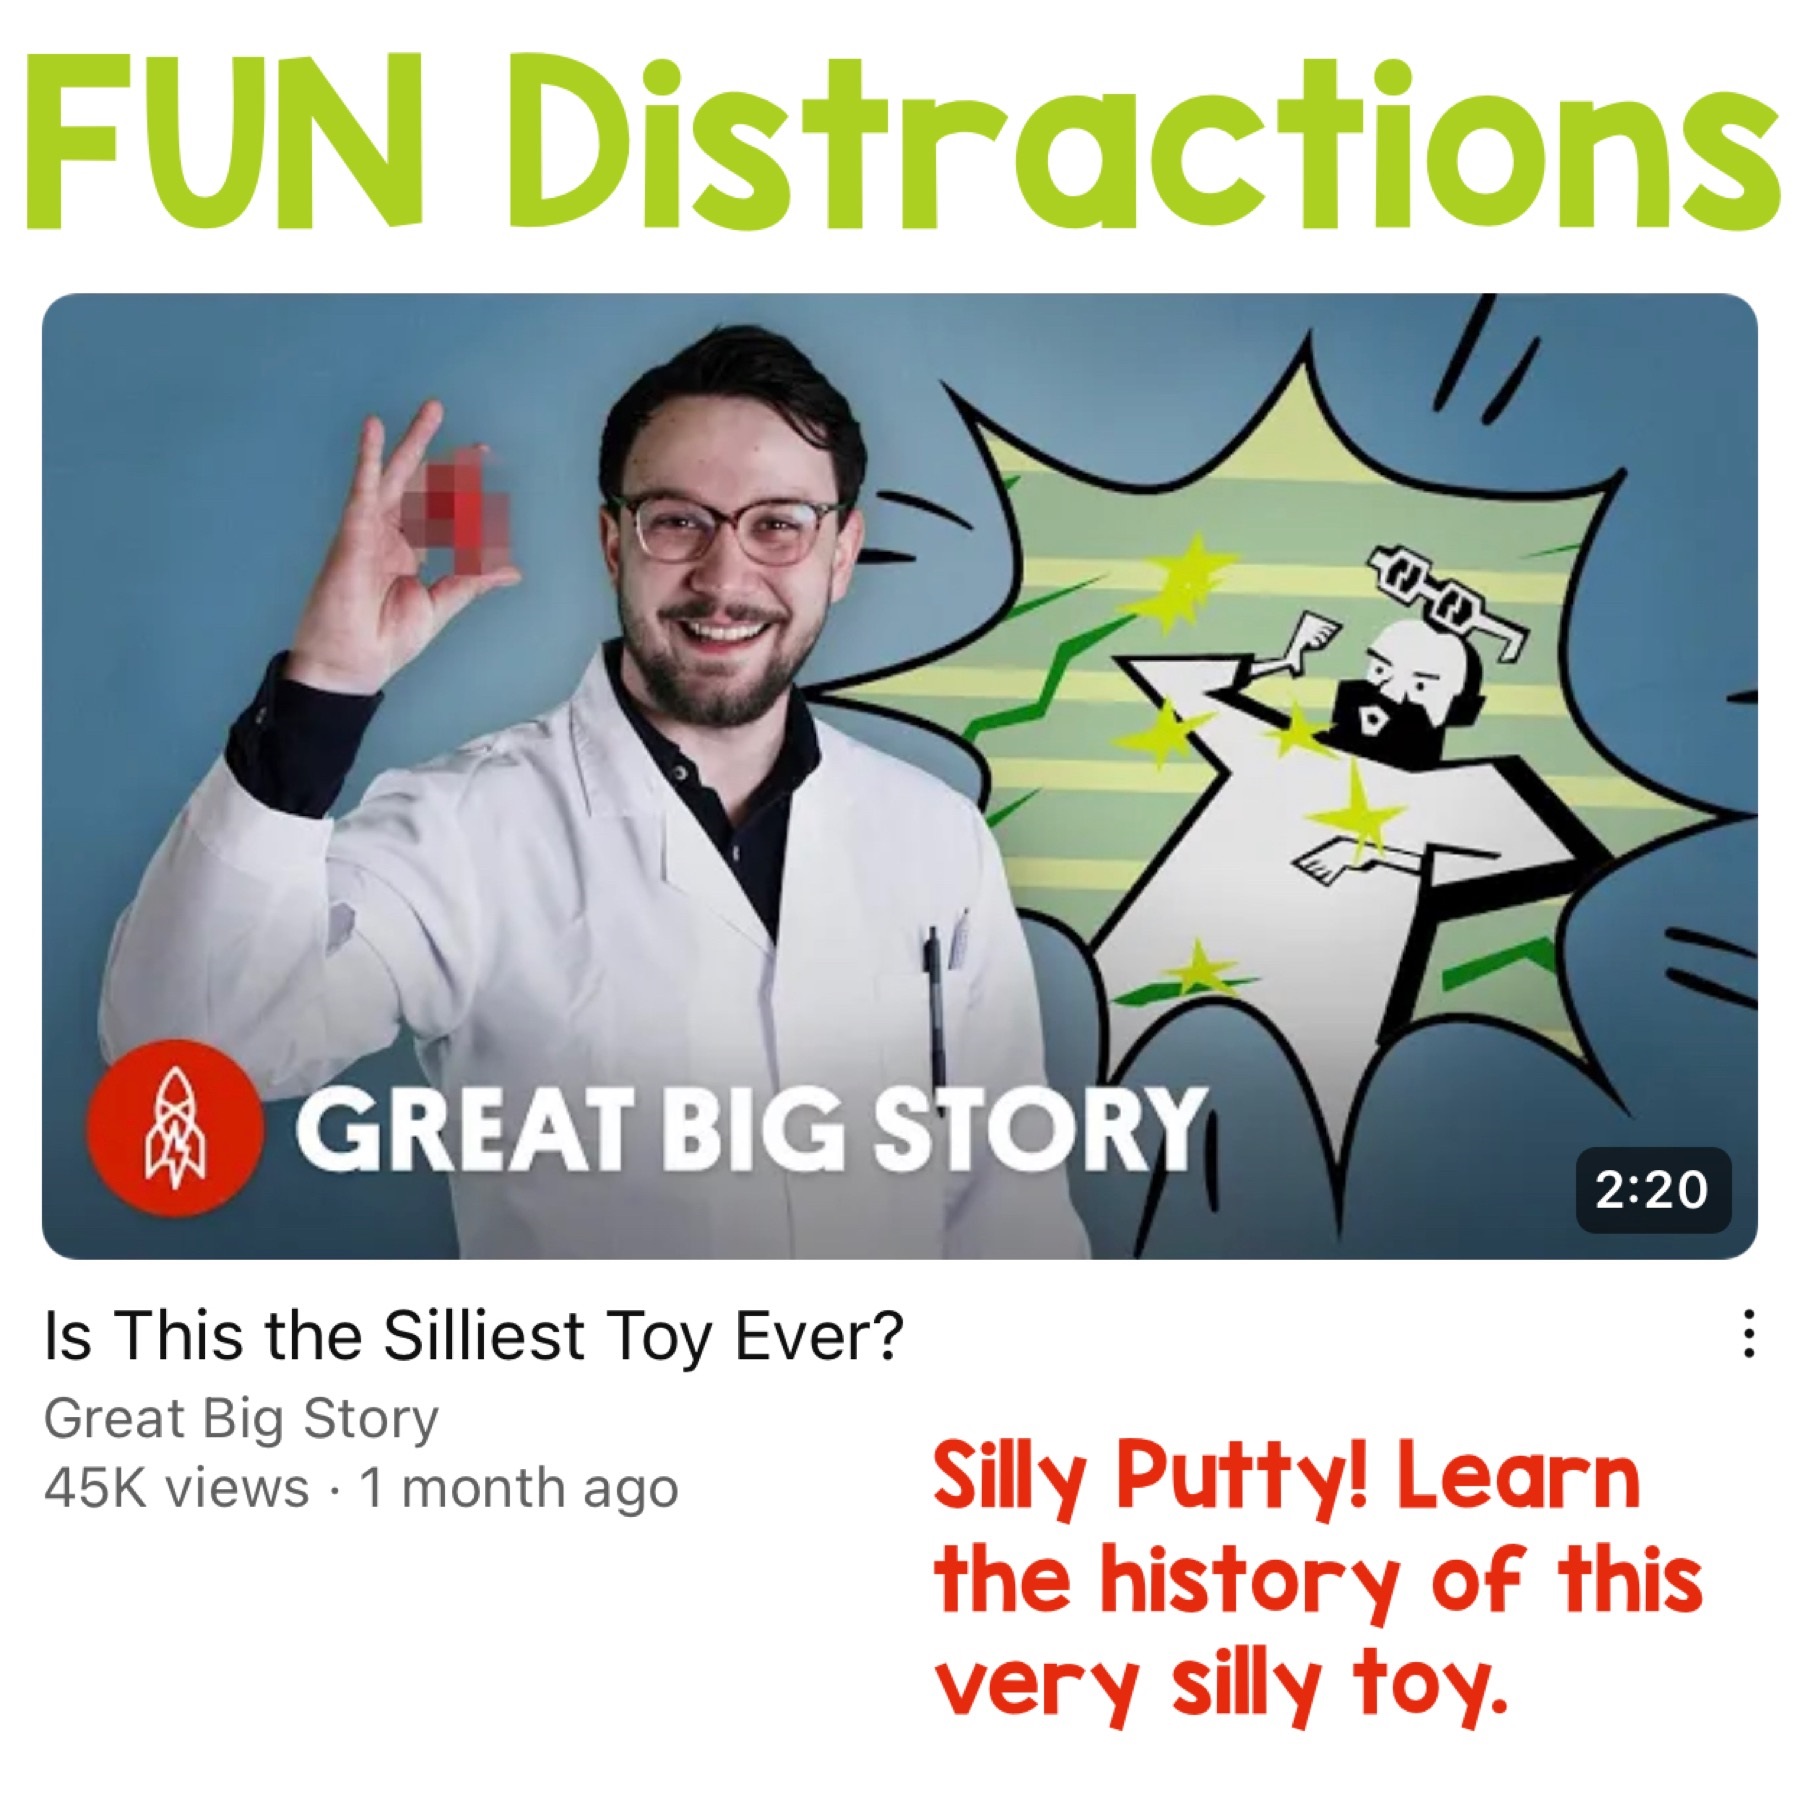 Great Big Story - Silly Putty